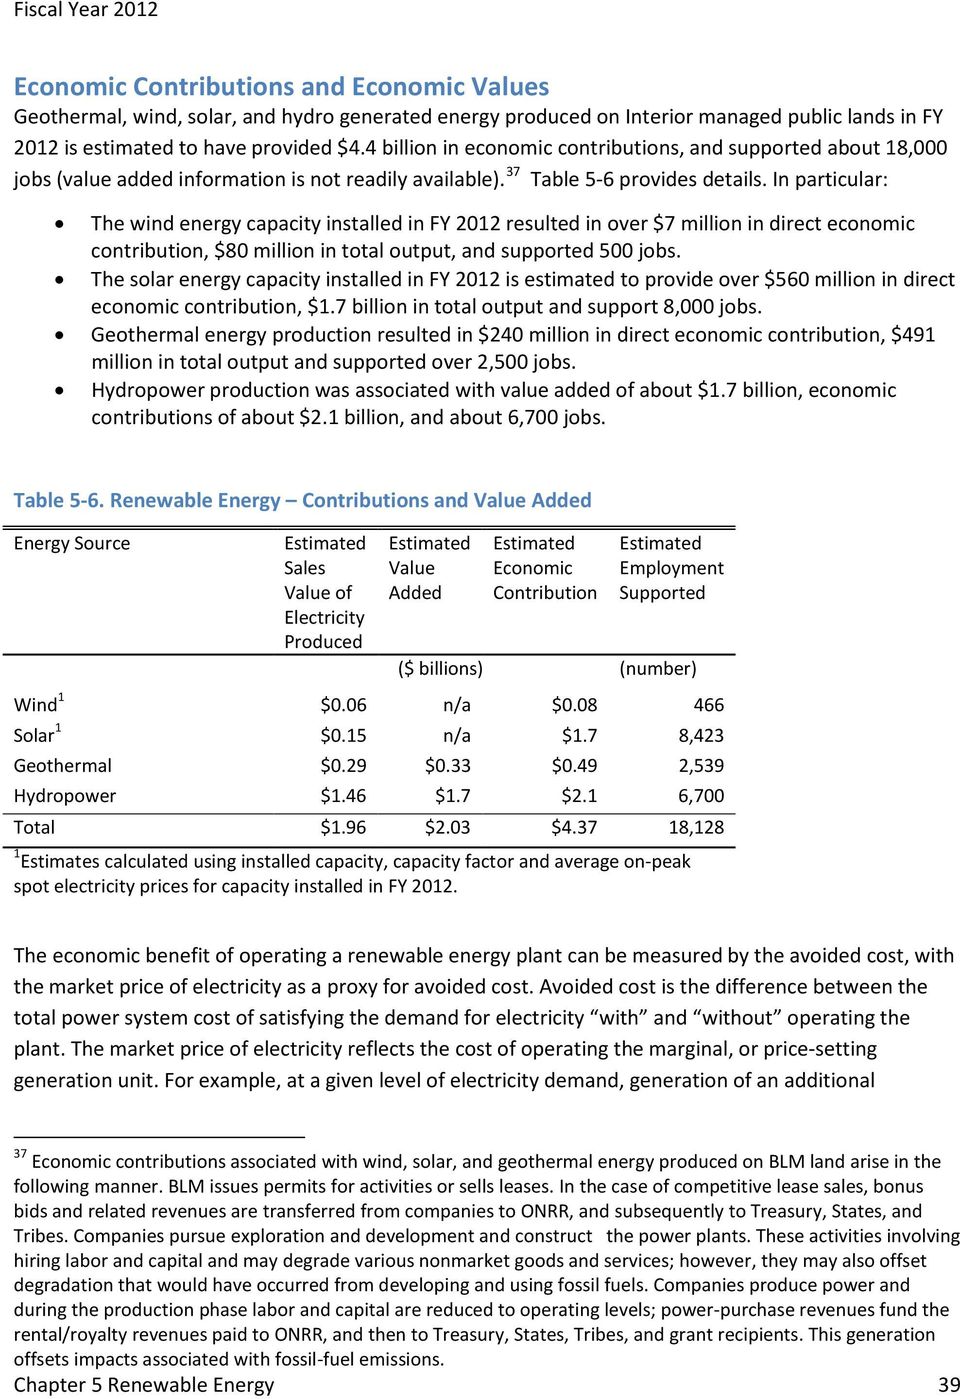 In particular: The wind energy capacity installed in FY 2012 resulted in over $7 million in direct economic contribution, $80 million in total output, and supported 500 jobs.